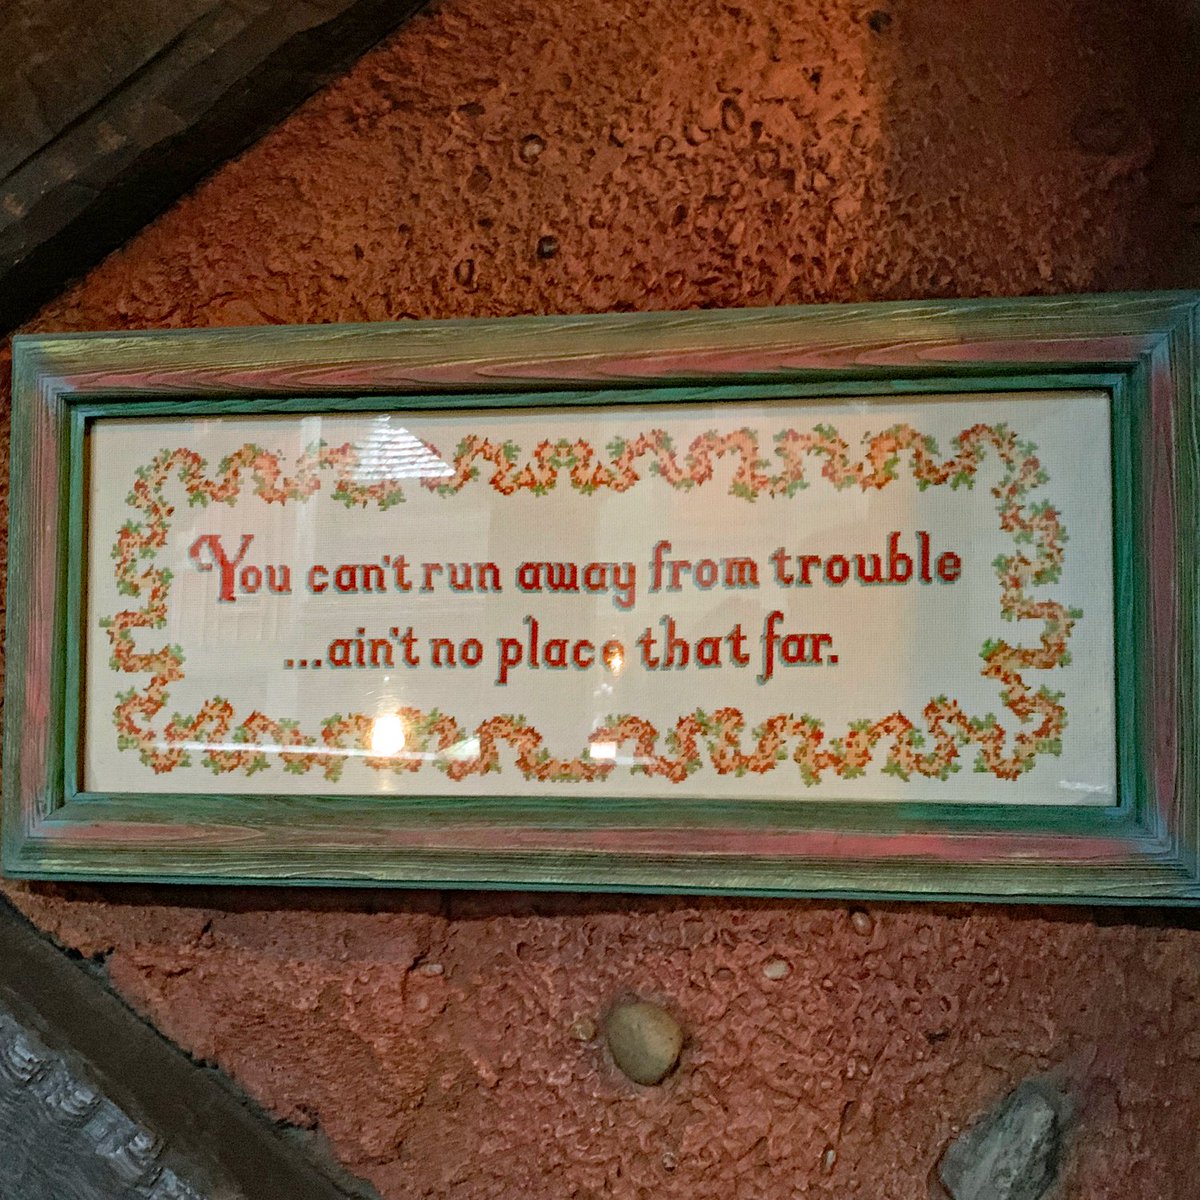 One was always reminded of the simple, yet profound, wisdom of Uncle Remus throughout the attraction.